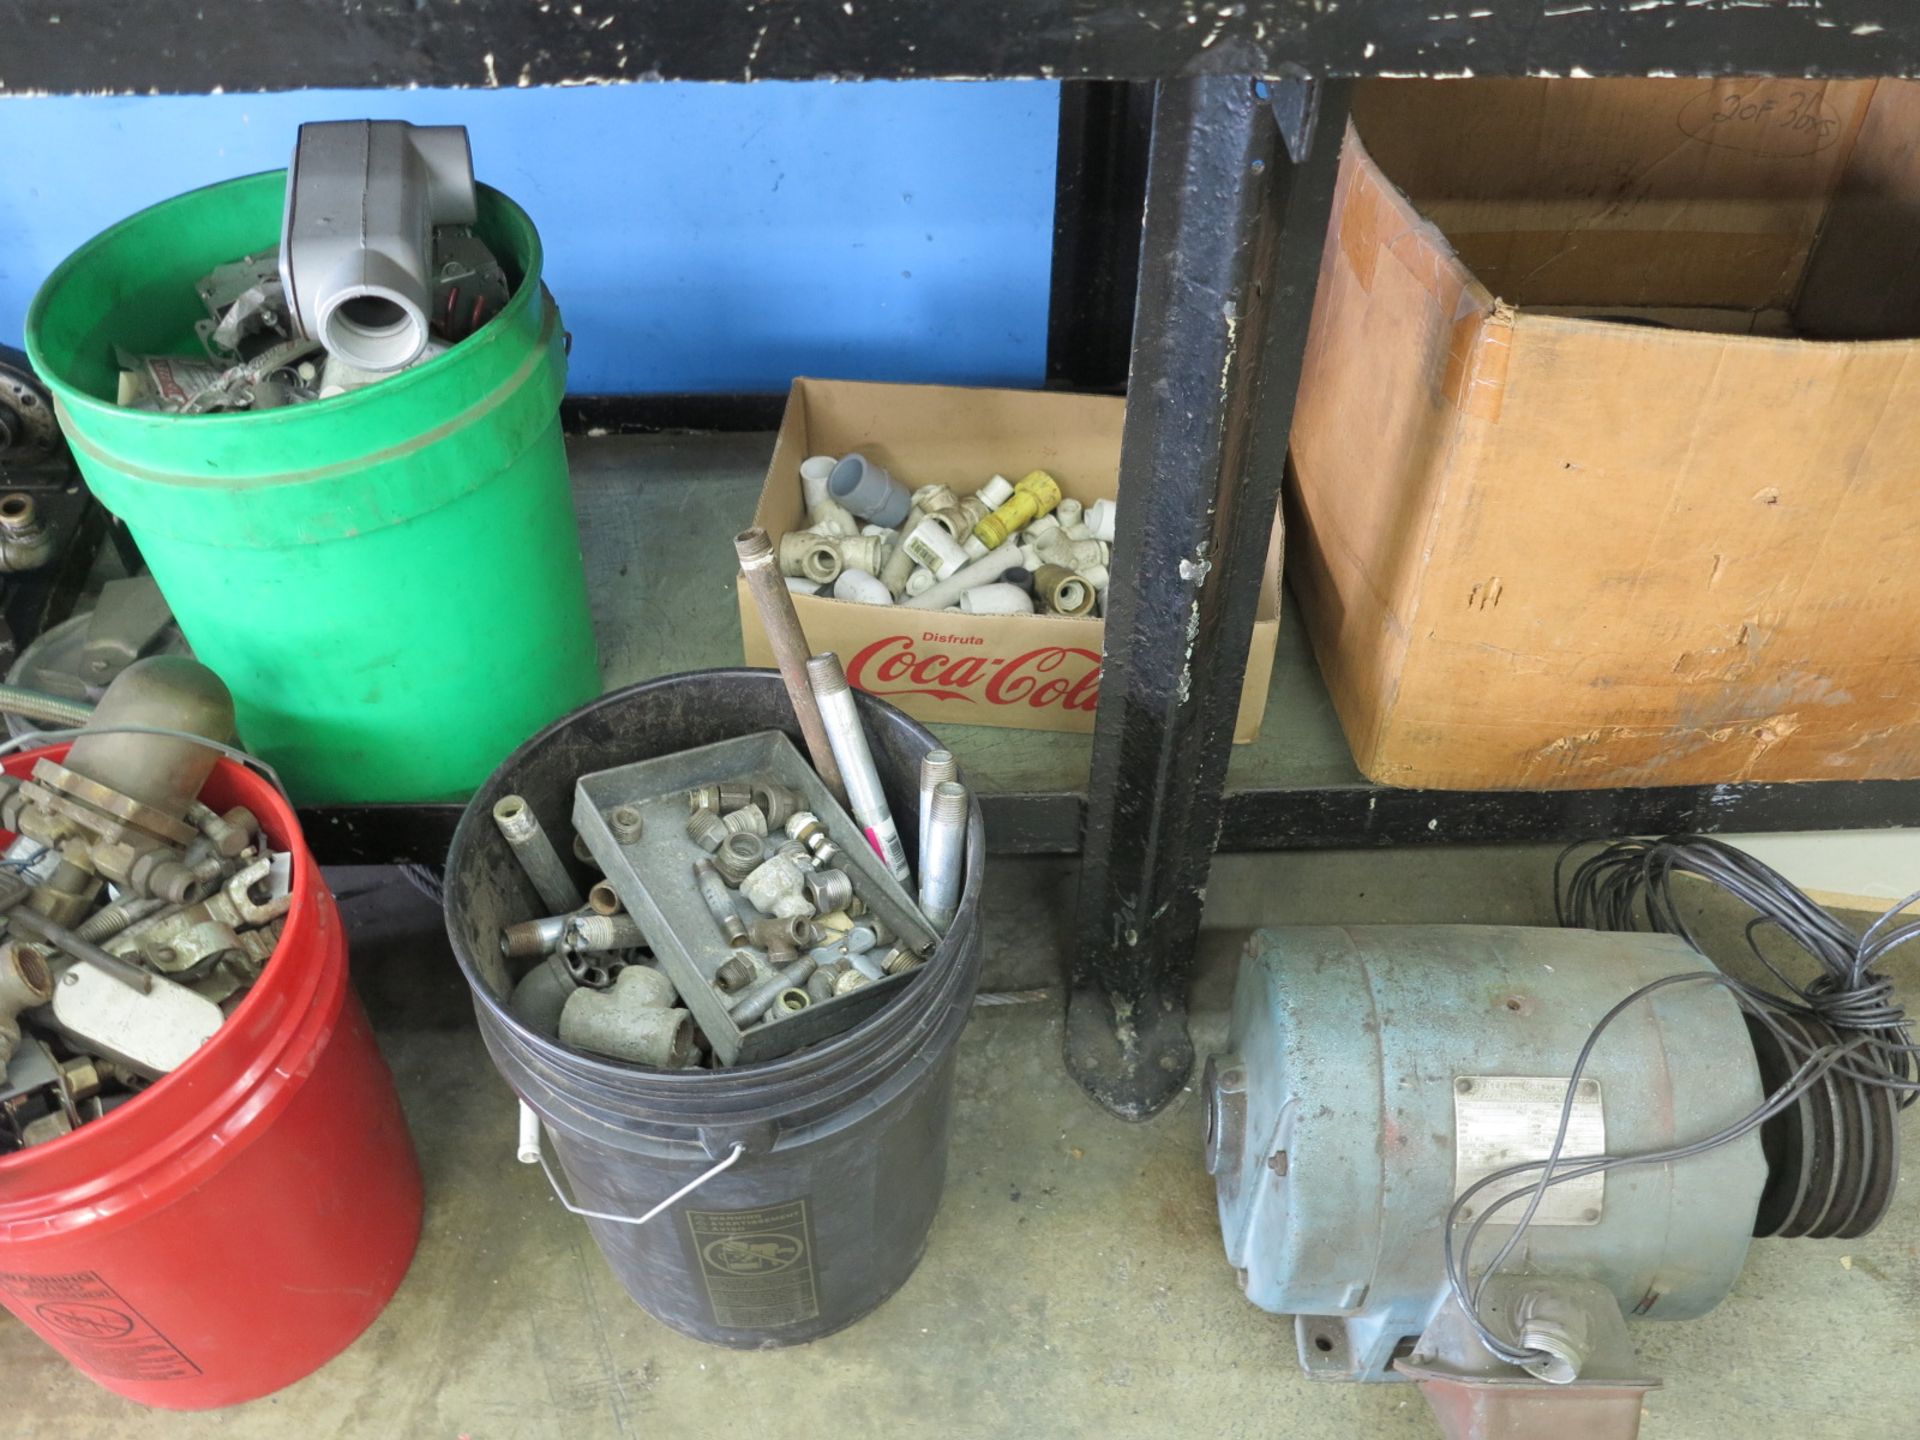 LOT - ASSORTED SHOP MAINTENANCE ITEMS, TO INCLUDE: VALVES, ELECTRICAL, PIPE FITTINGS, BEARINGS, A/ - Image 3 of 5